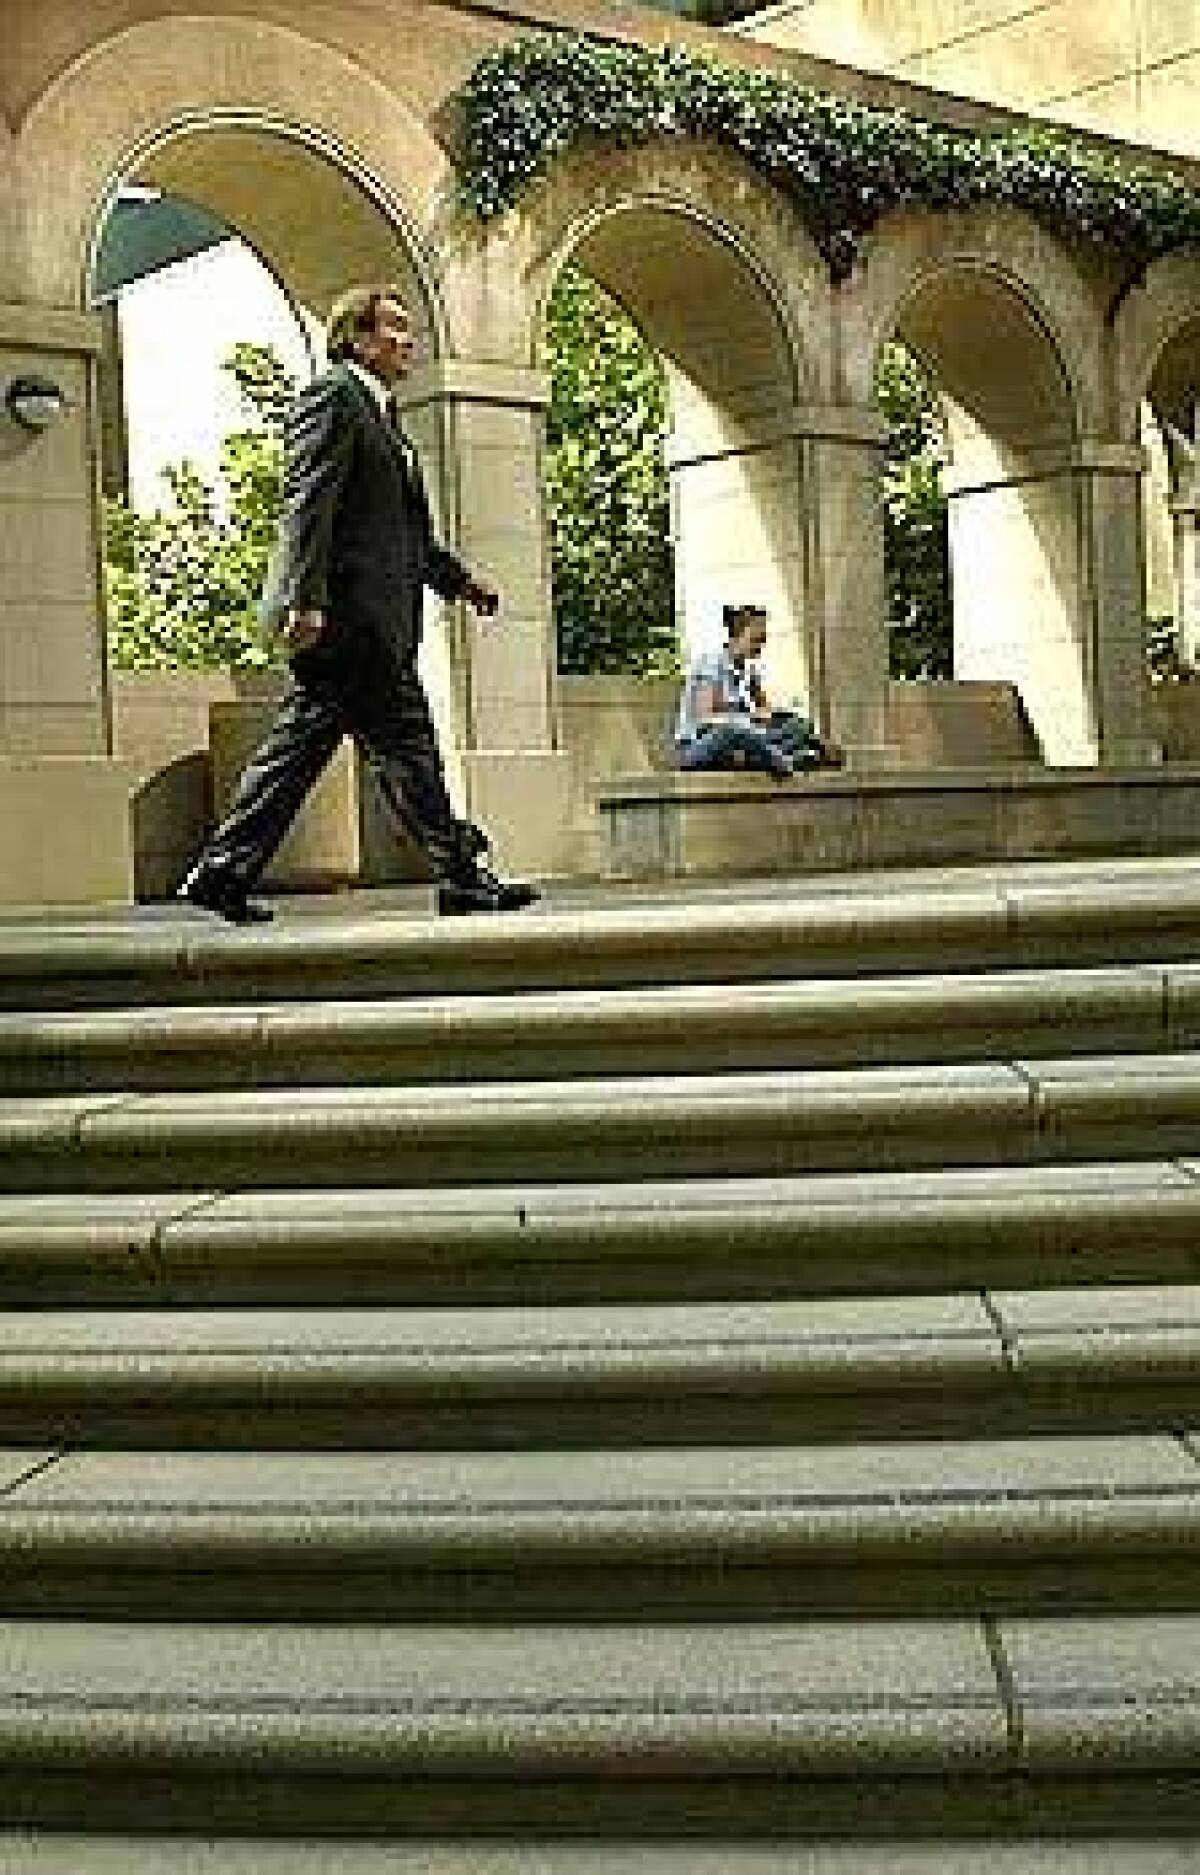 The Bunker Hill steps, reminiscent of Romes famed Spanish Steps, have eight staircases that offer different views of the city.